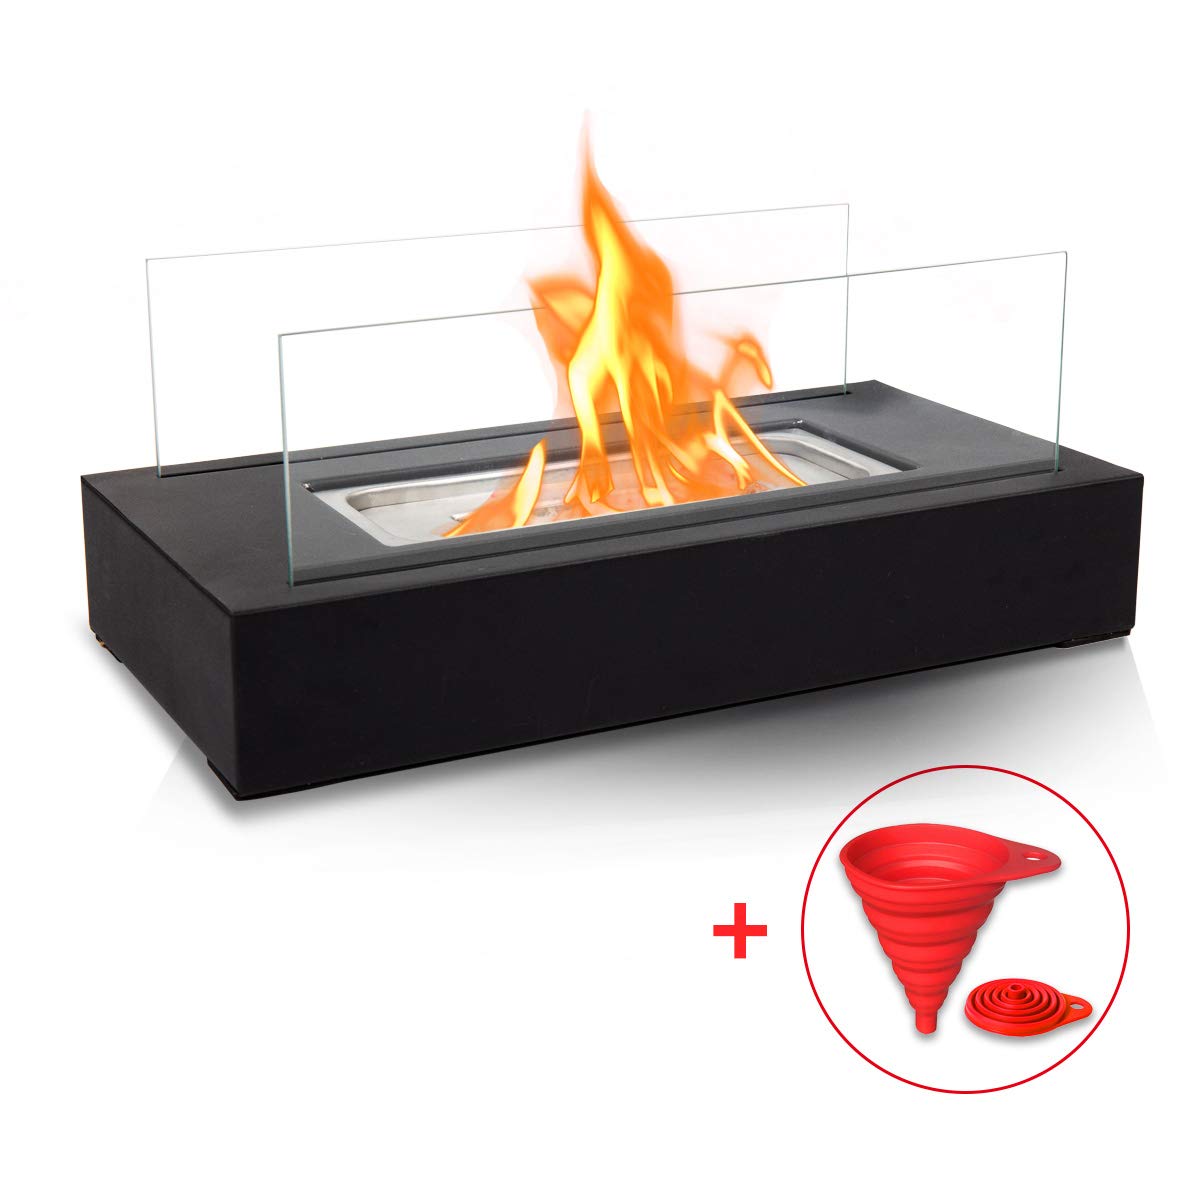 Electric Fireplace that Heats 2000 Sq Ft Unique Brian & Dany Ventless Tabletop Portable Fire Bowl Pot Bio Ethanol Fireplace Indoor Outdoor Fire Pit In Black W Fire Killer and Funnel